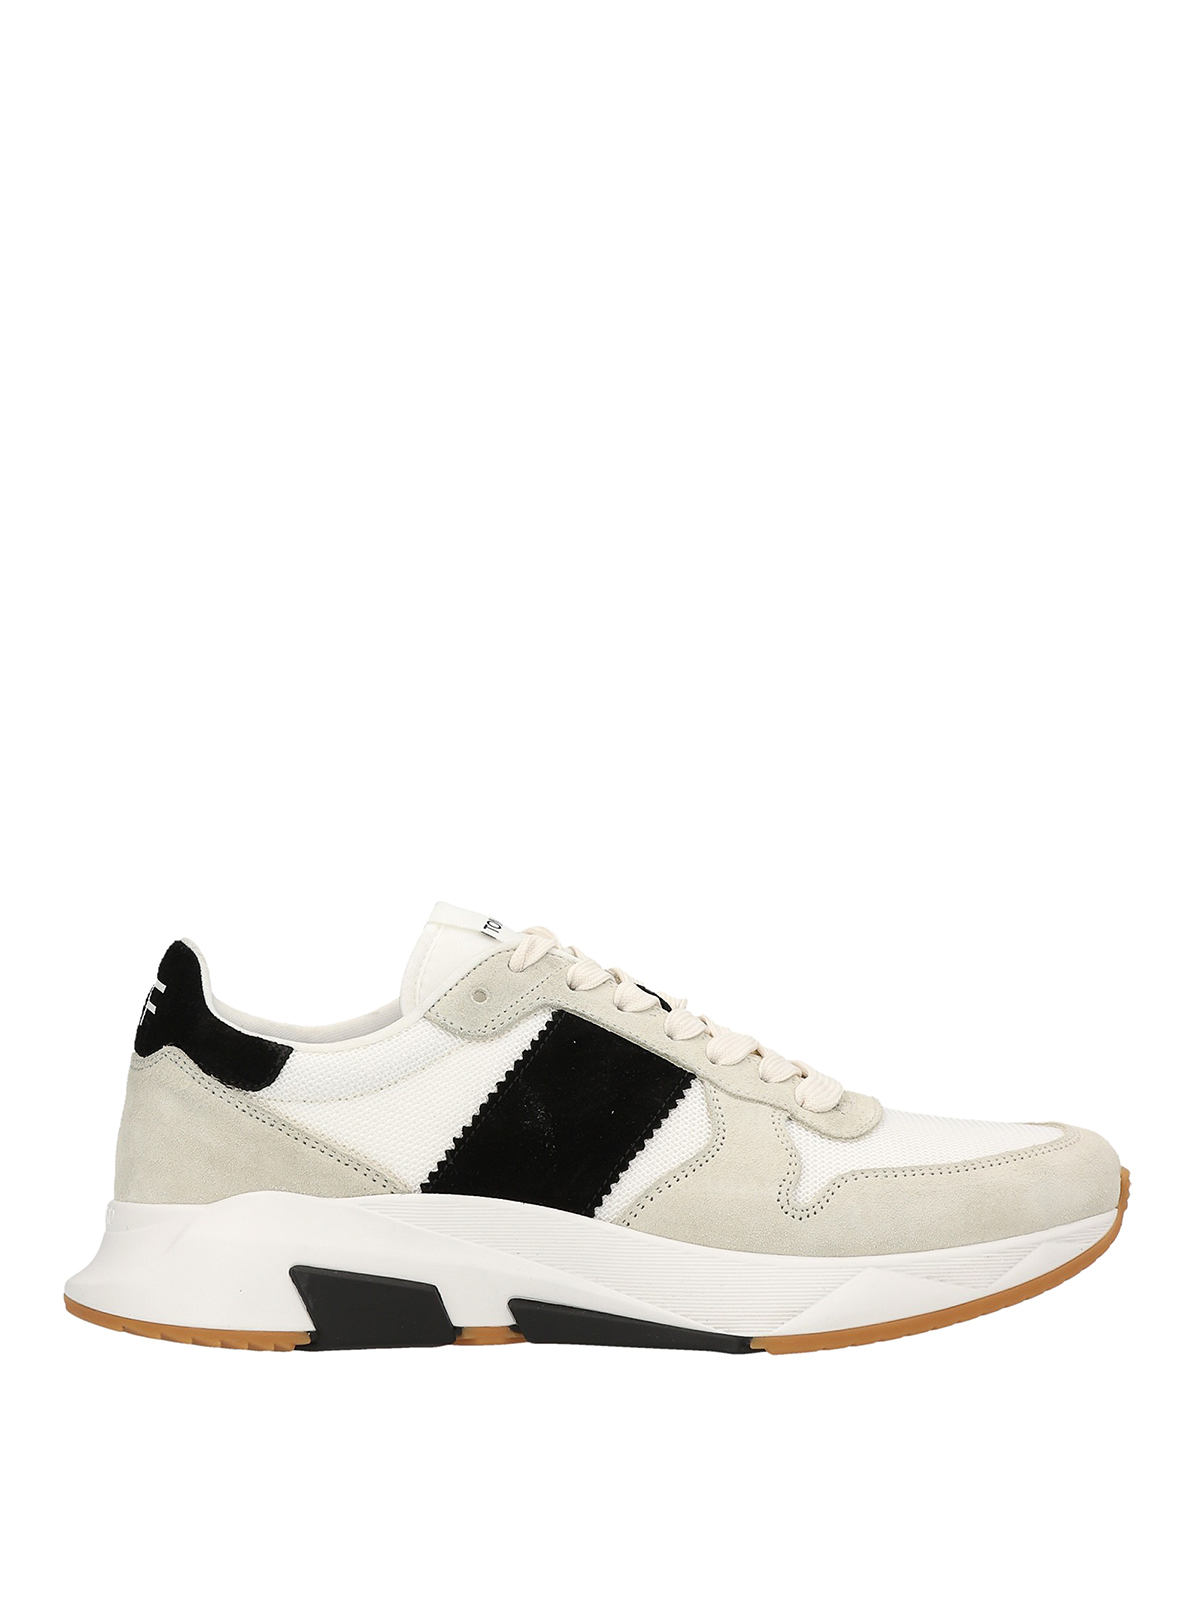 Tom Ford Suede Logo Sneakers In Multicolor